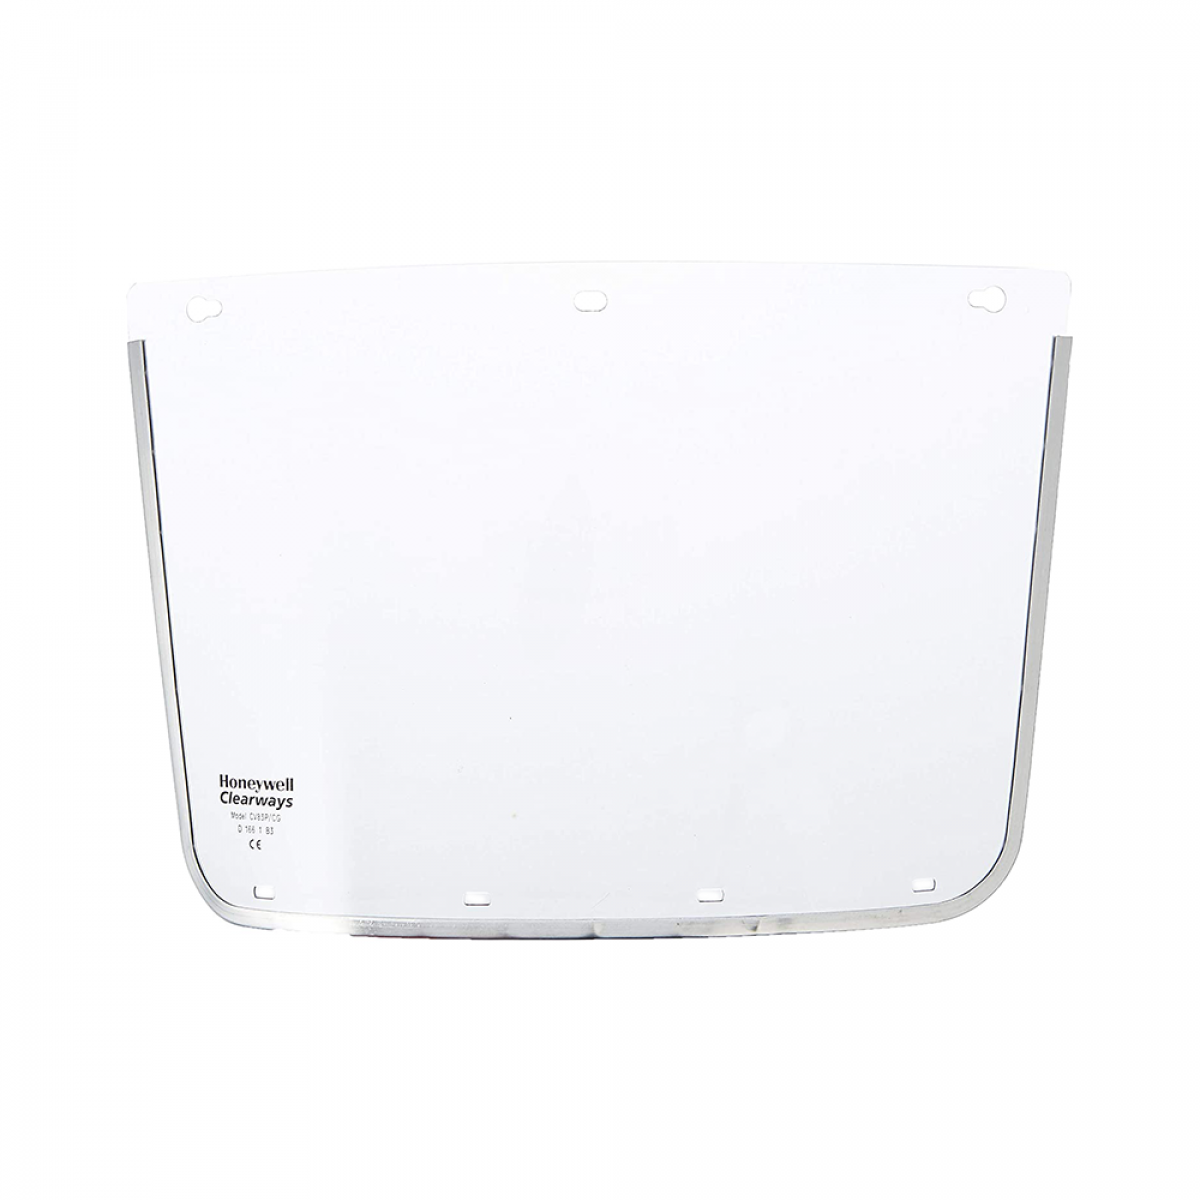 Visor Option for Honeywell Clearways Face Shield